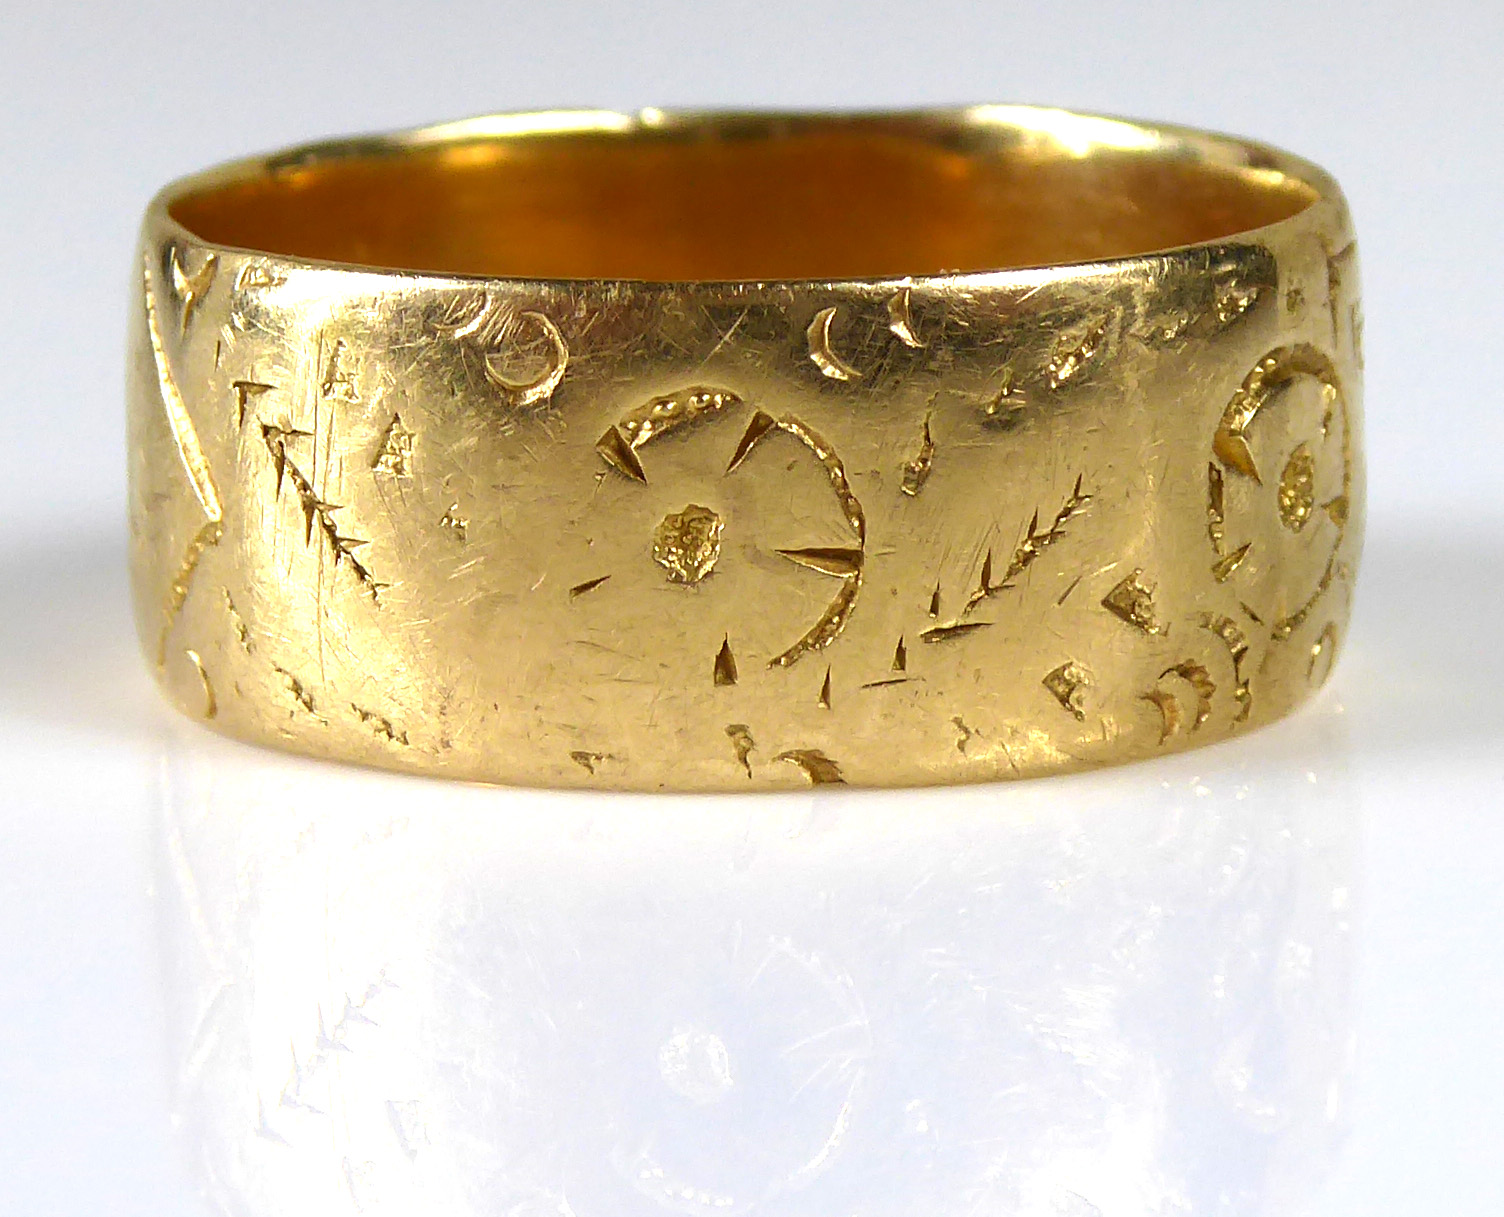 A VINTAGE 18CT GOLD WEDDING BAND Finely engraved with floral scrolls (size M). - Image 2 of 2